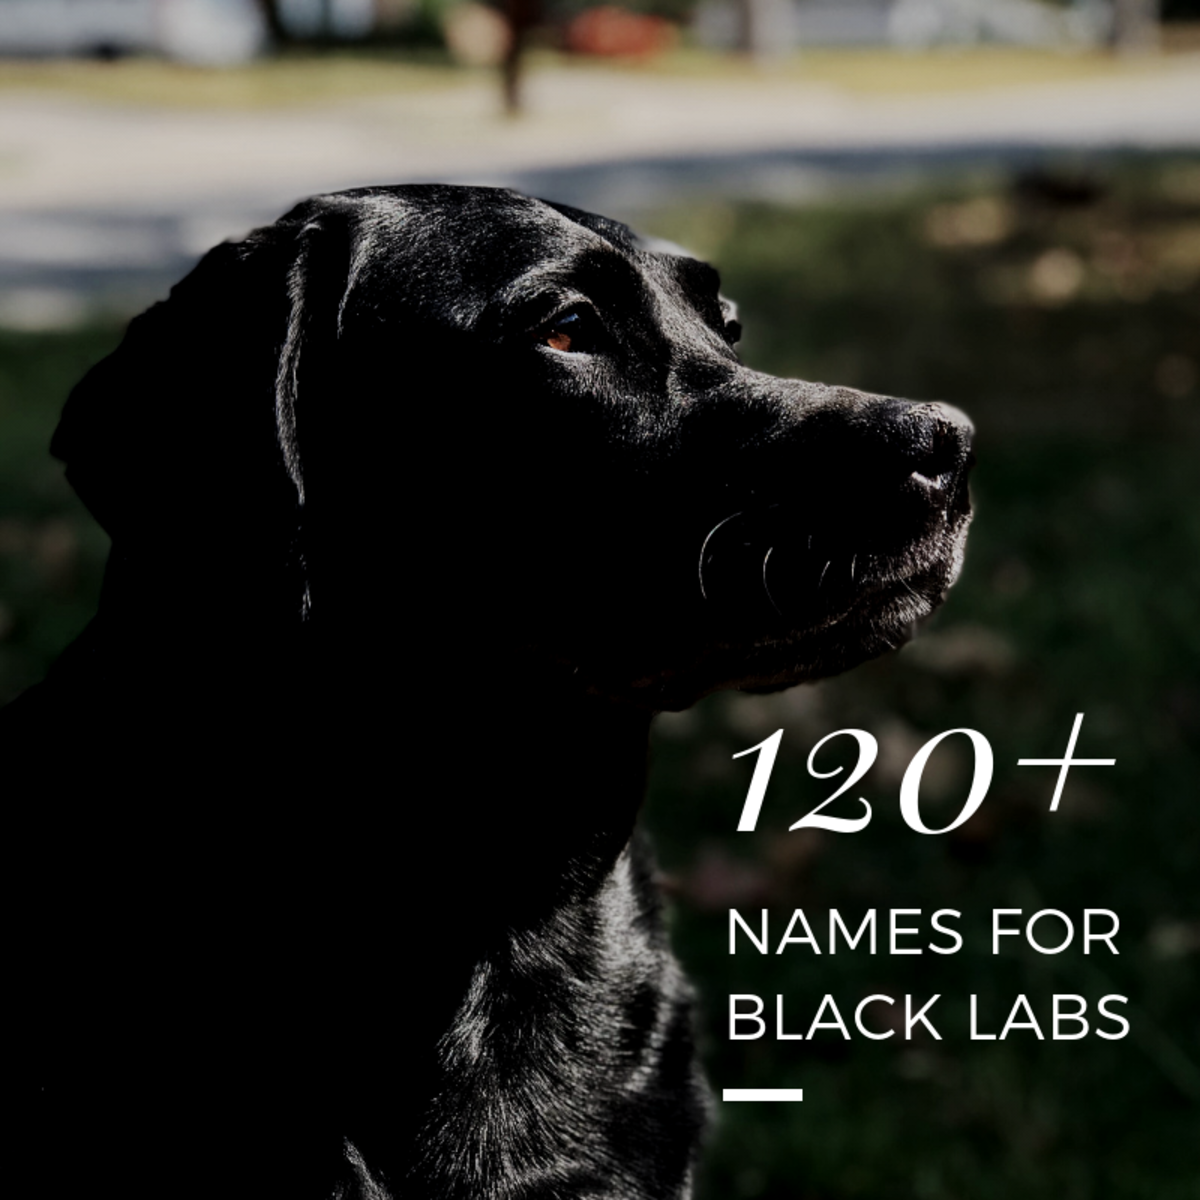 Discover over 120 names for your new black lab.